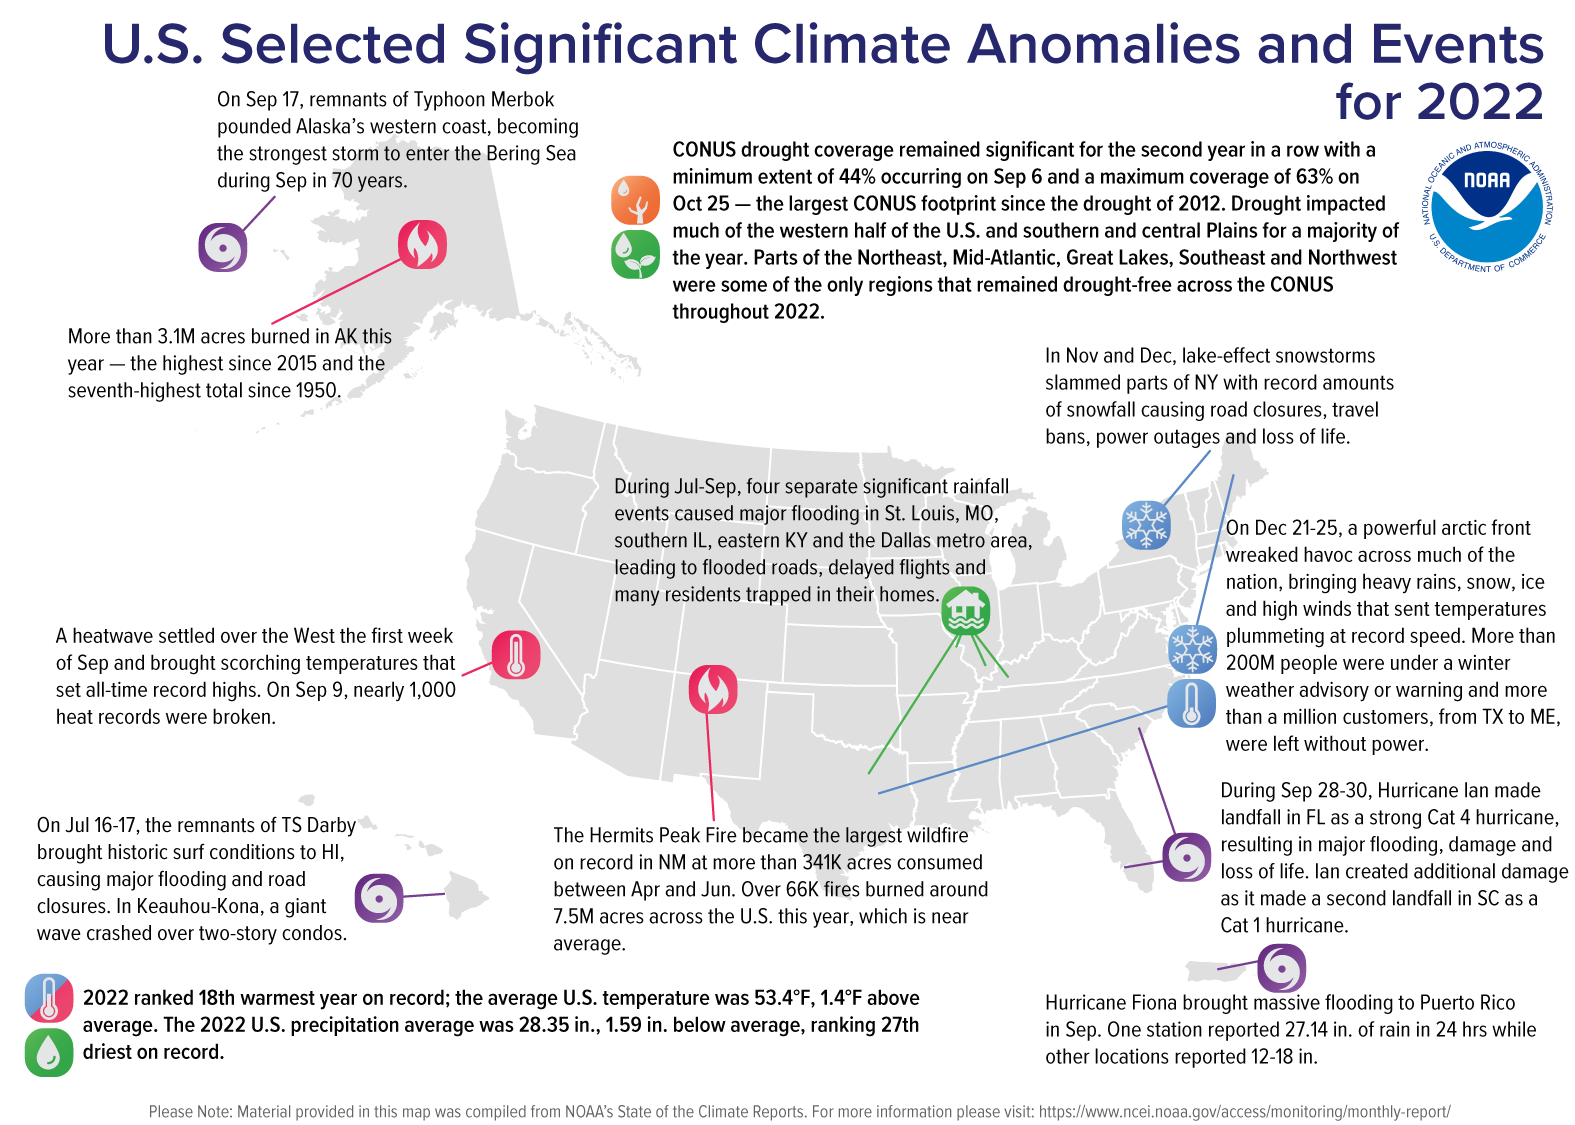 A map of the United States plotted with significant climate events that occurred throughout 2022